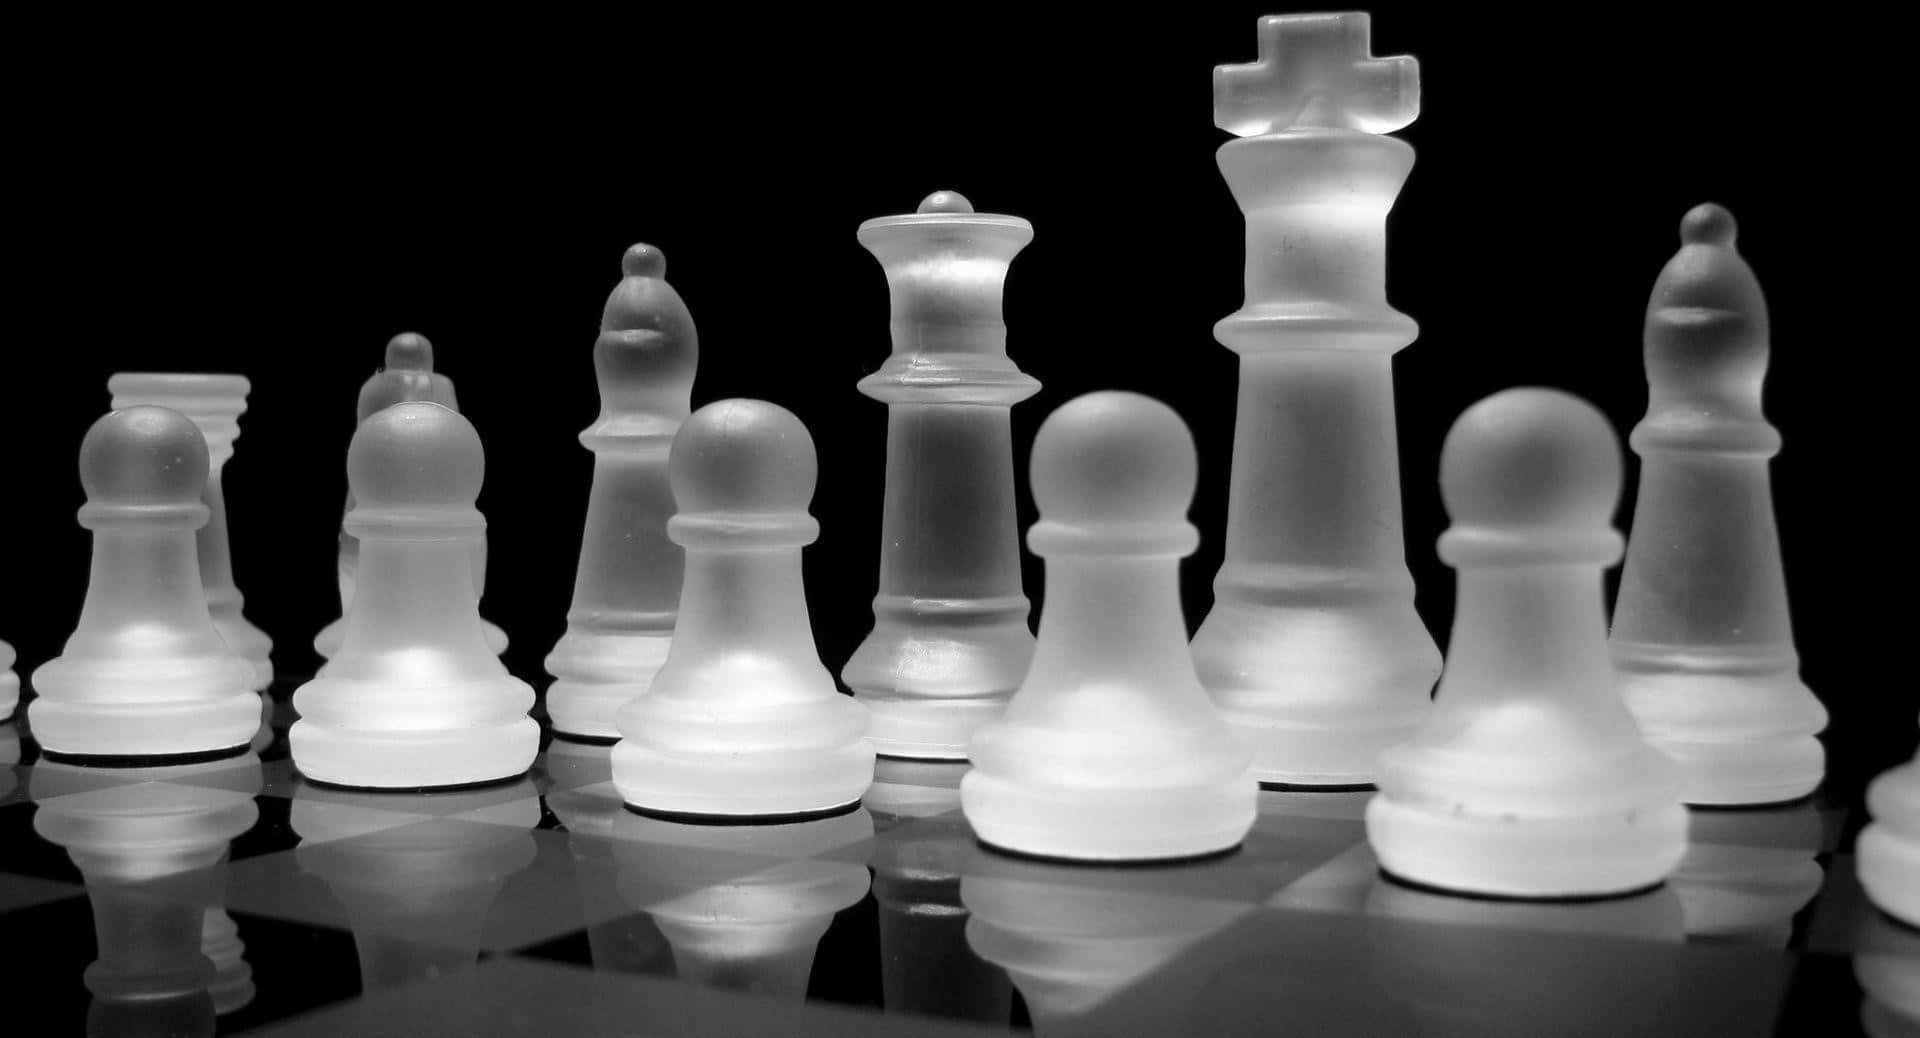 A classic game of strategy - Chess